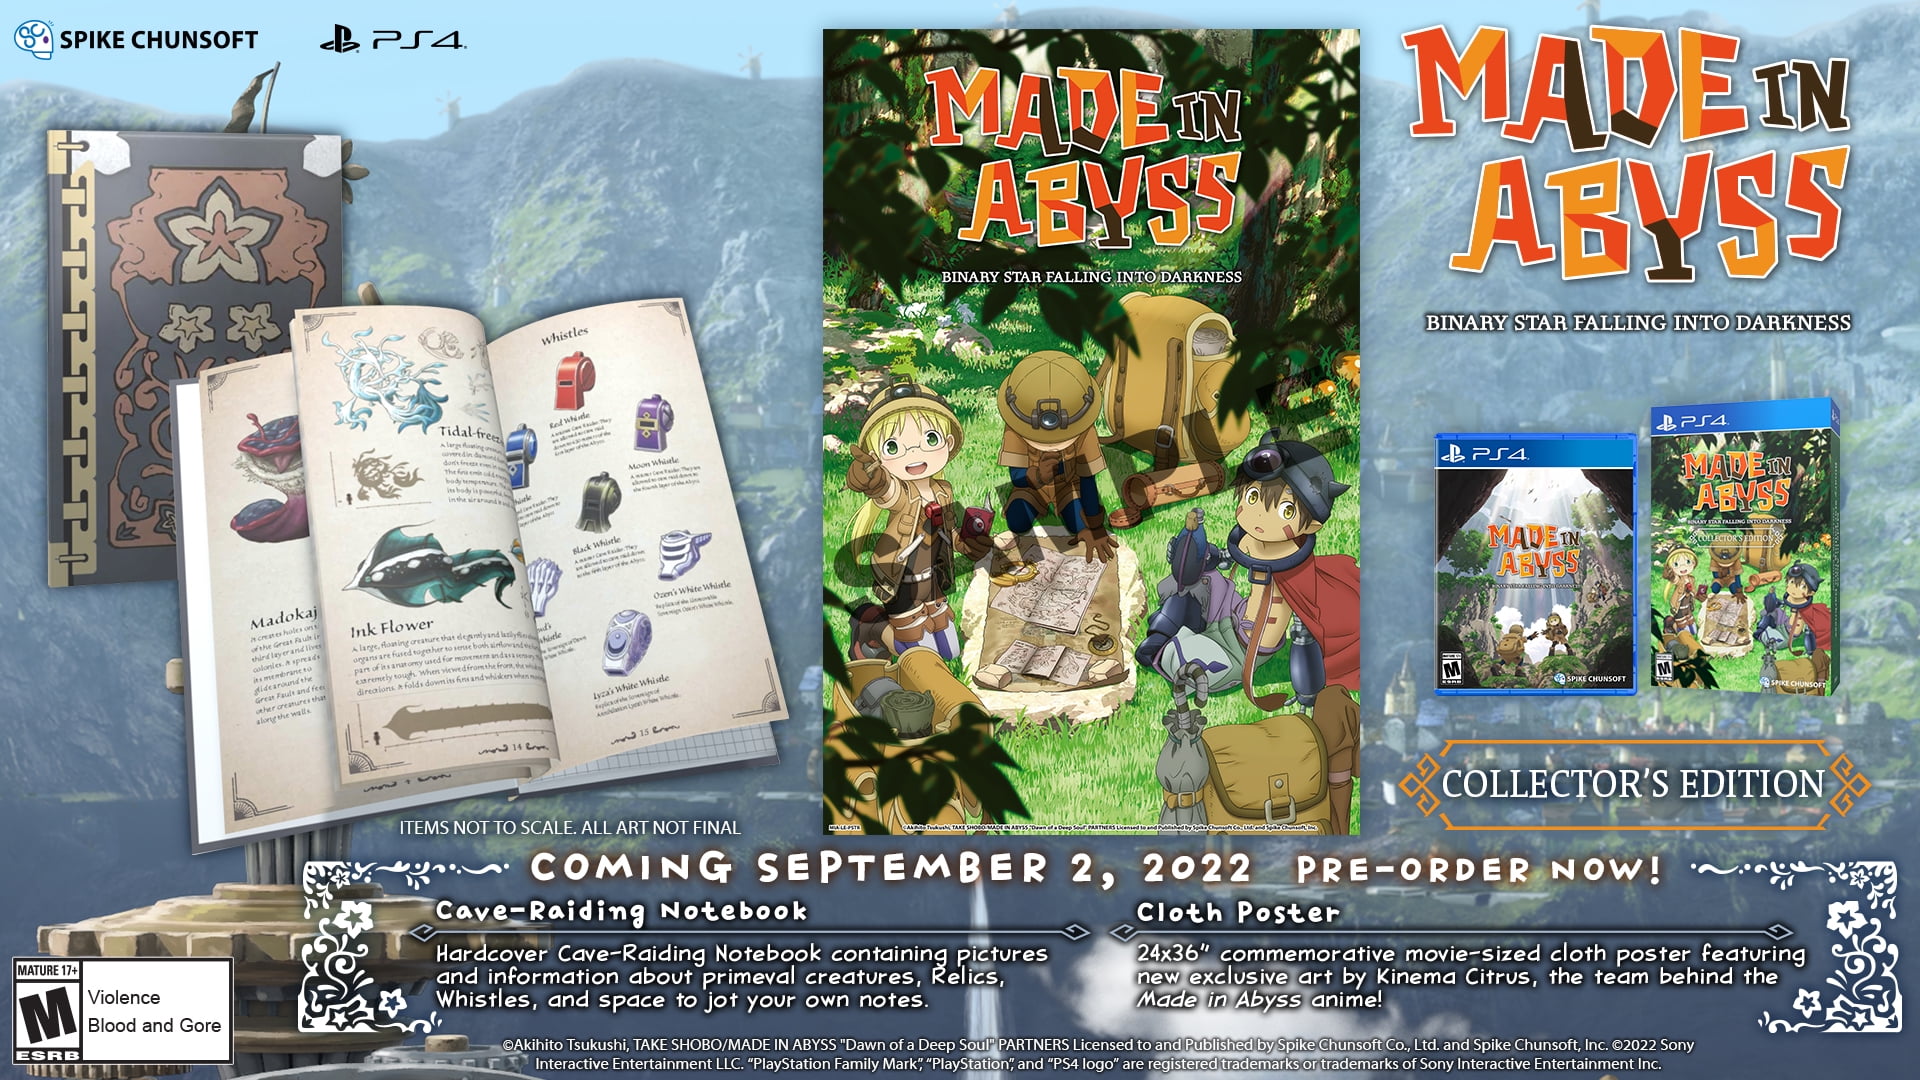 Made in Abyss Episode 1 Review: A Breathtaking World and a Girl